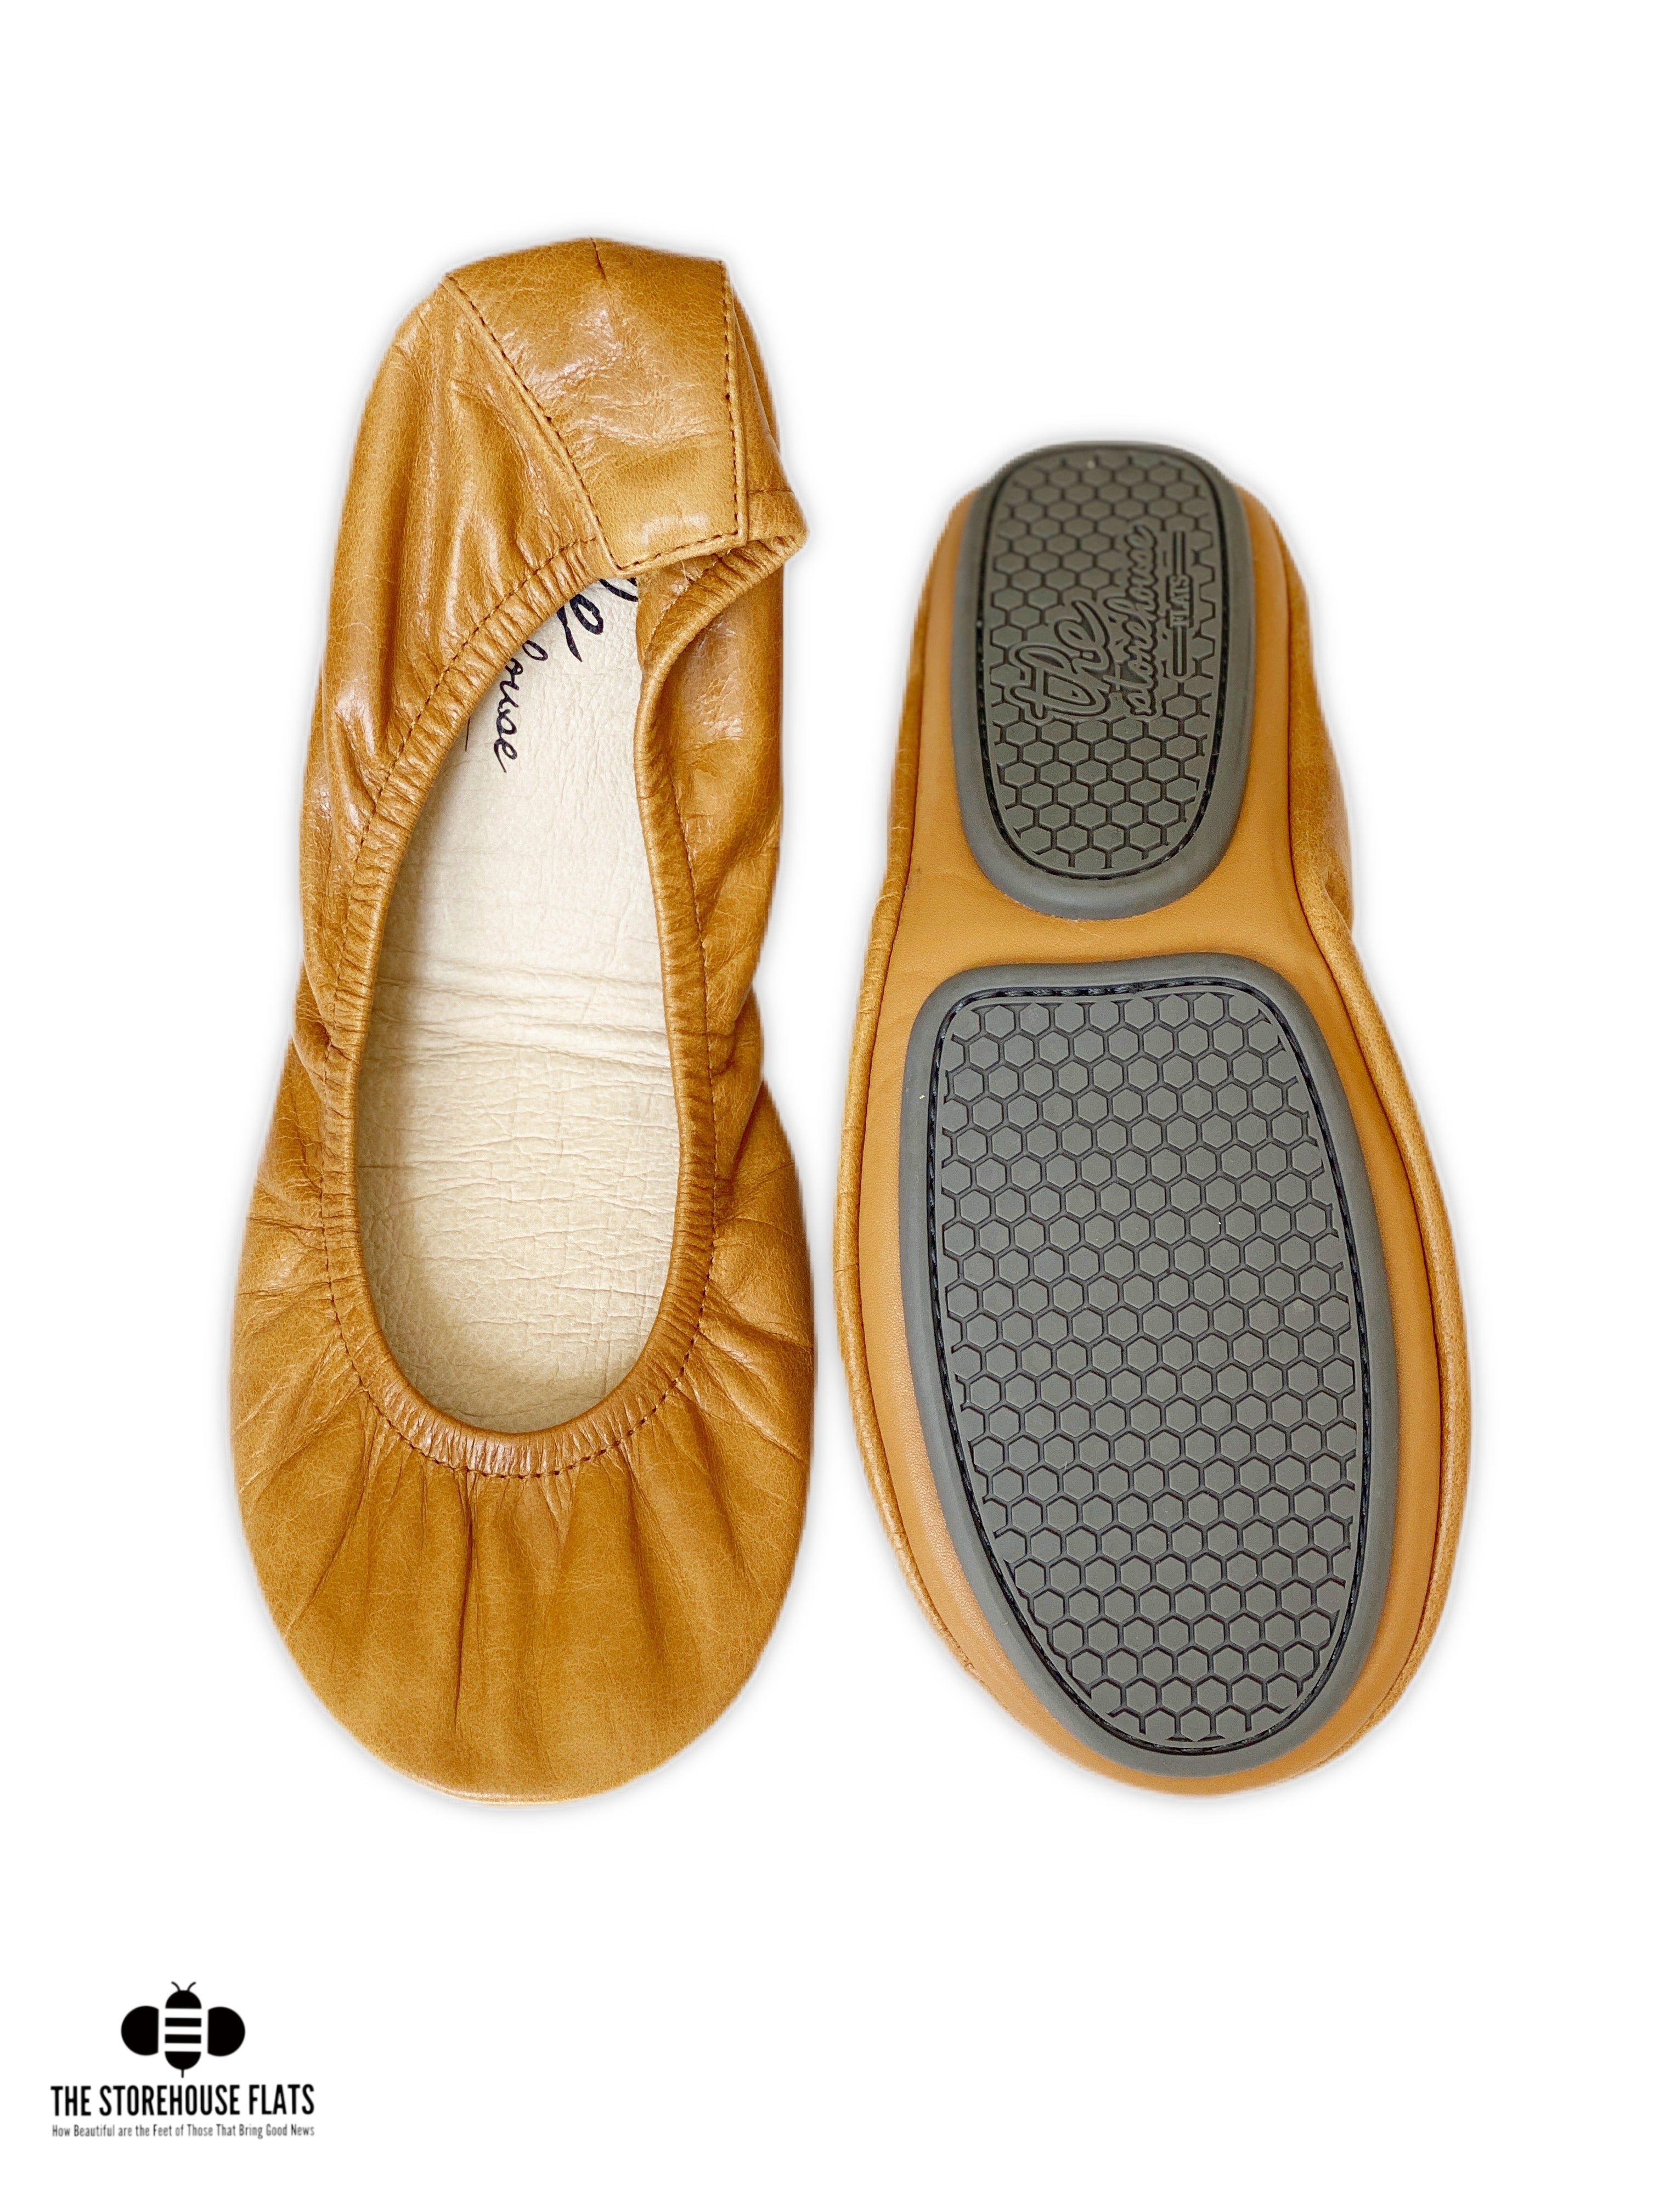 CAMEL OIL TANNED | JULY PREORDER - The Storehouse Flats